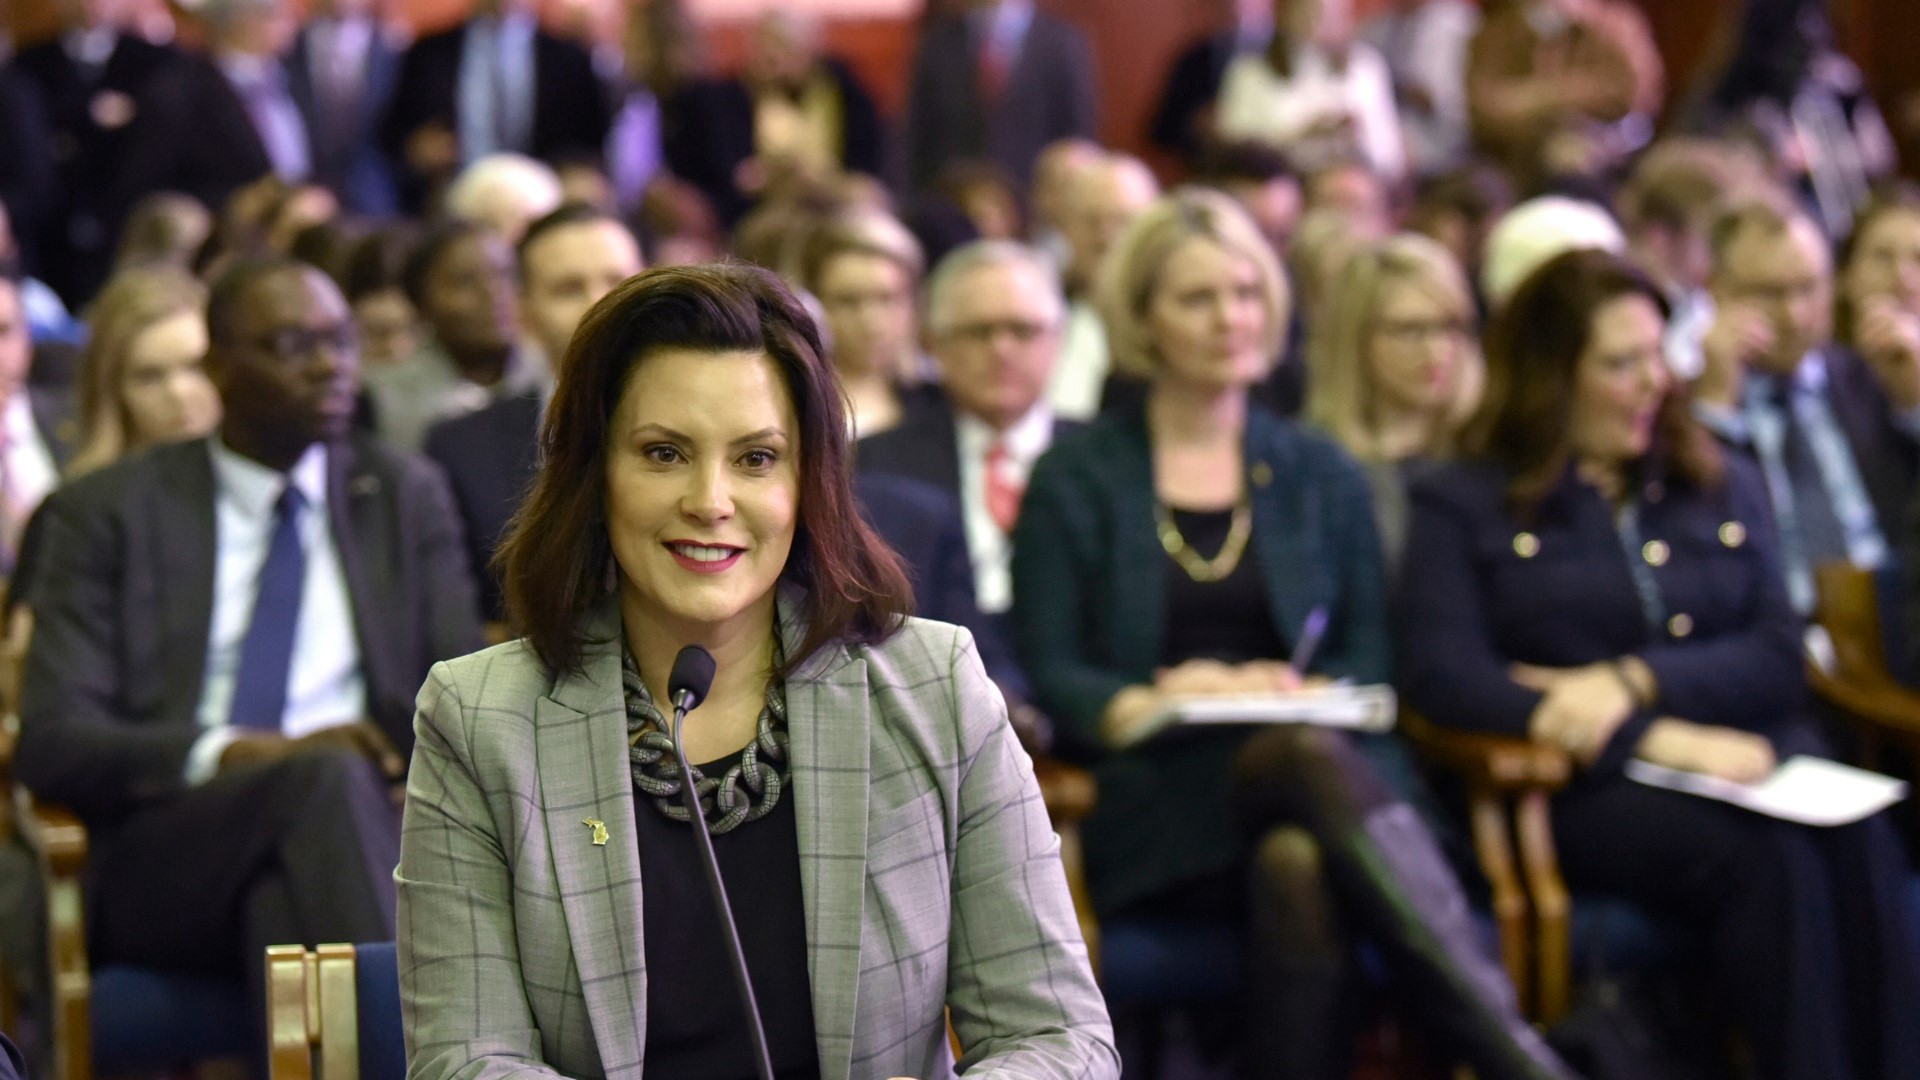 Whitmer will be at a town hall at City High/Middle School with a number of other state lawmakers from both sides of the aisle to address some of MIchigan's biggest issues.